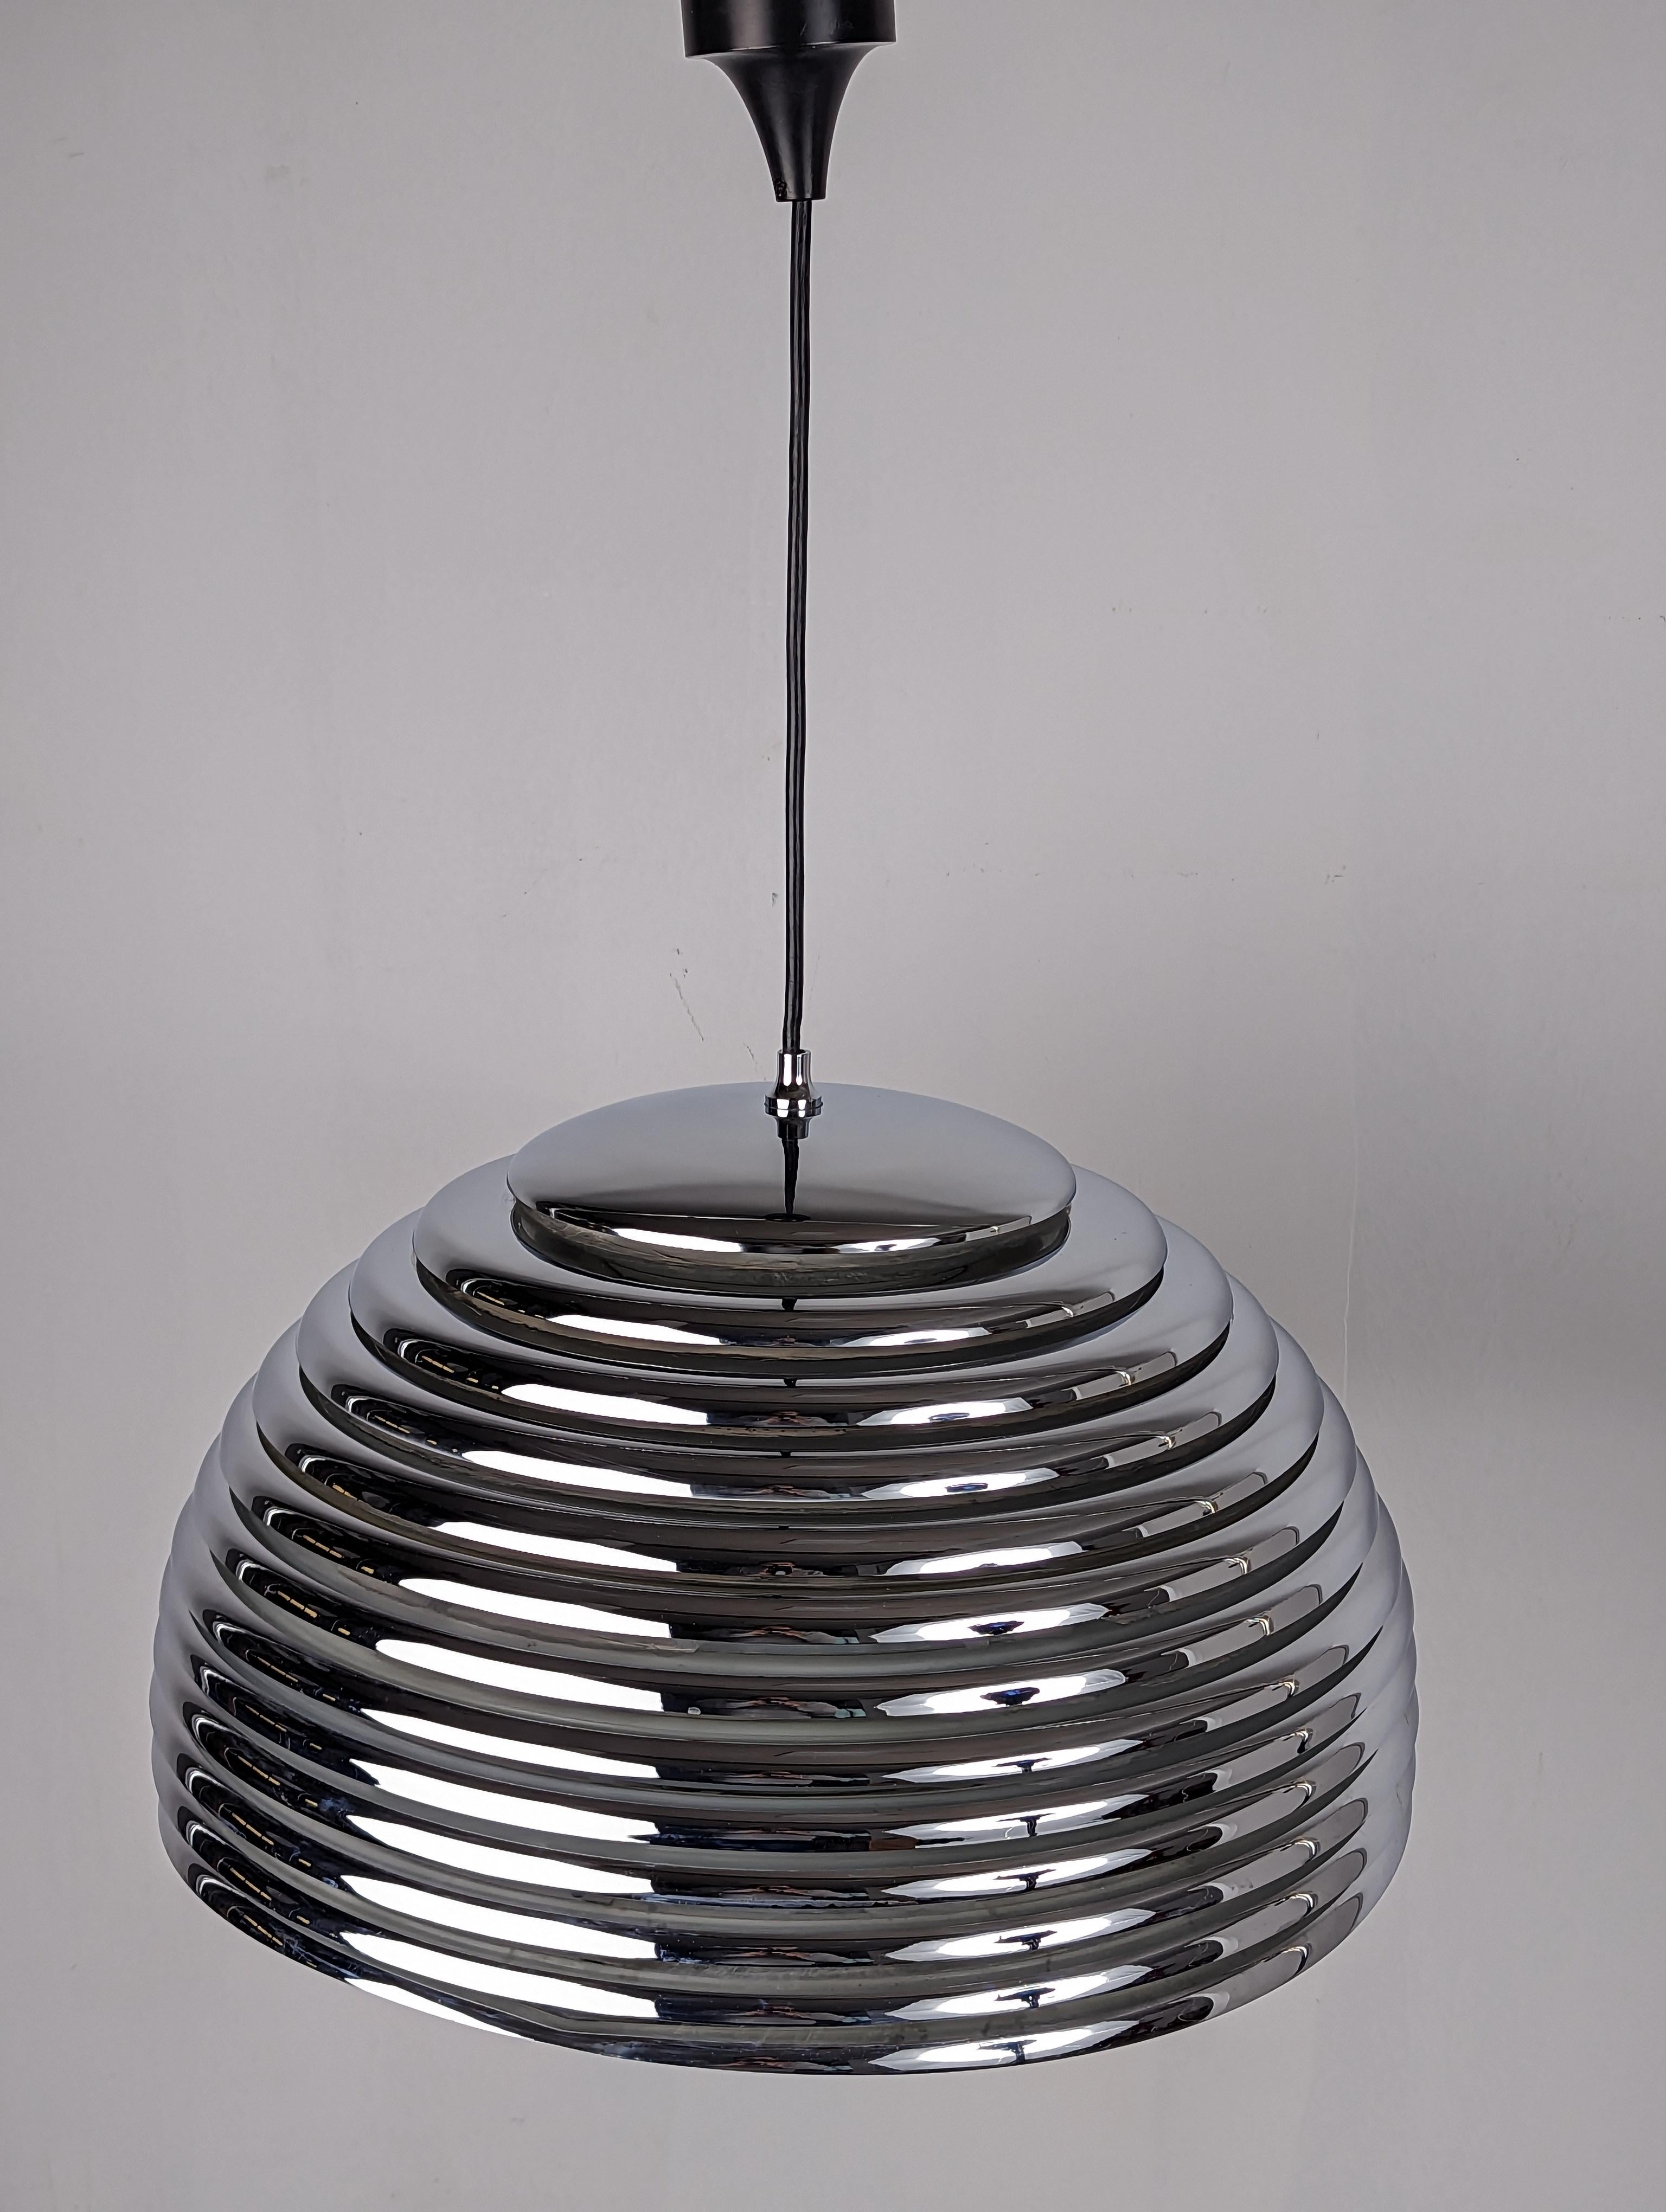 Spectacular Saturn model chrome lamp by the Japanese designer Kazuo Motozawa for the German house Staff in the 1970s, with a diameter of 50 cm, this model is truly impressive and a true collector's item for lovers of midcentury design.